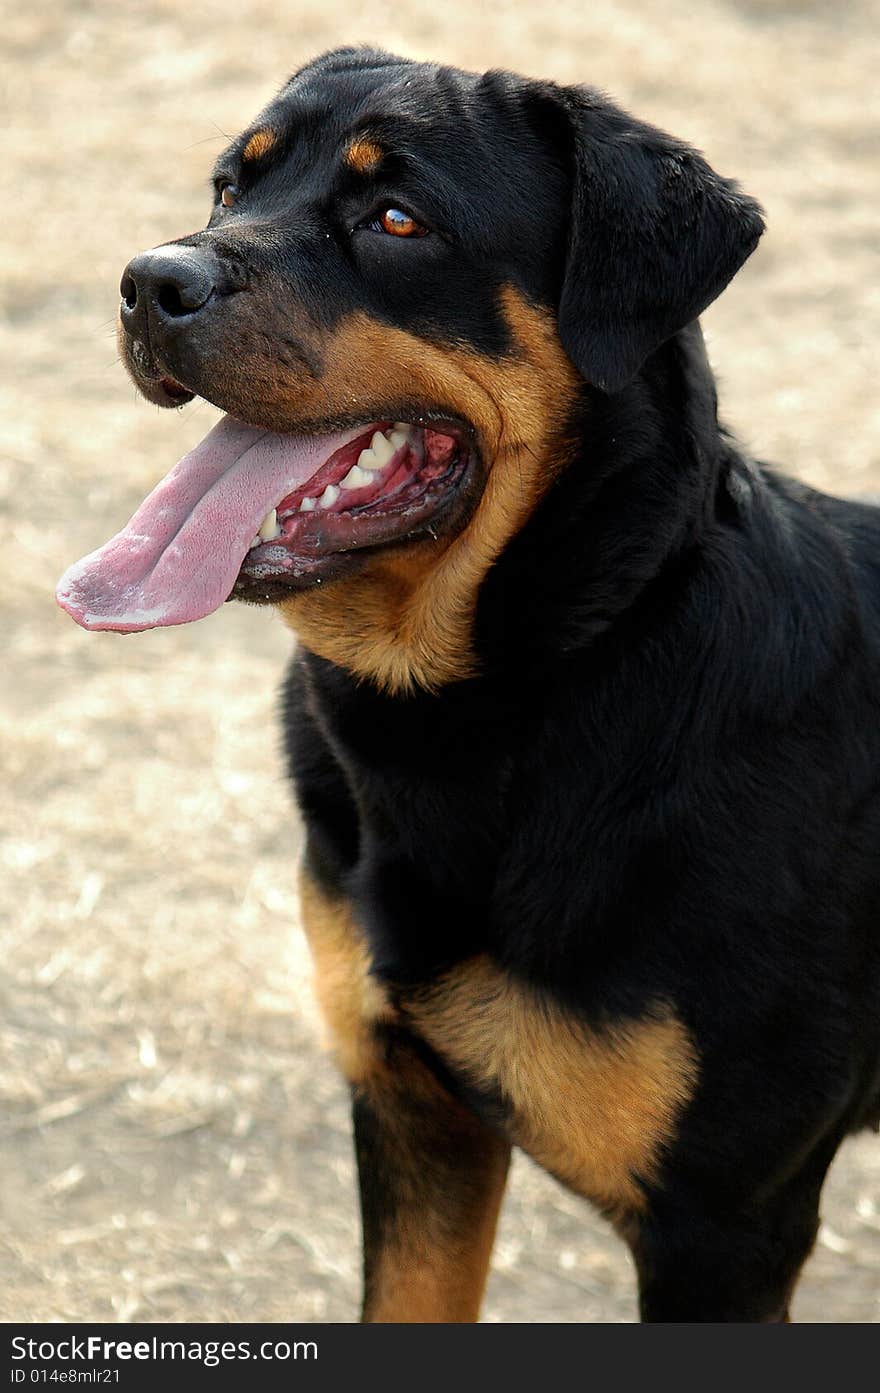 The Rottweiler body is strong, act fast fierce, the vigour is violent,It is have most in the world courageous with power of the dog categories.This dog was used for ever to watch herd of cattle.Them are the cleverness and strong to become contact with easiest of the dog grow. The Rottweiler body is strong, act fast fierce, the vigour is violent,It is have most in the world courageous with power of the dog categories.This dog was used for ever to watch herd of cattle.Them are the cleverness and strong to become contact with easiest of the dog grow.